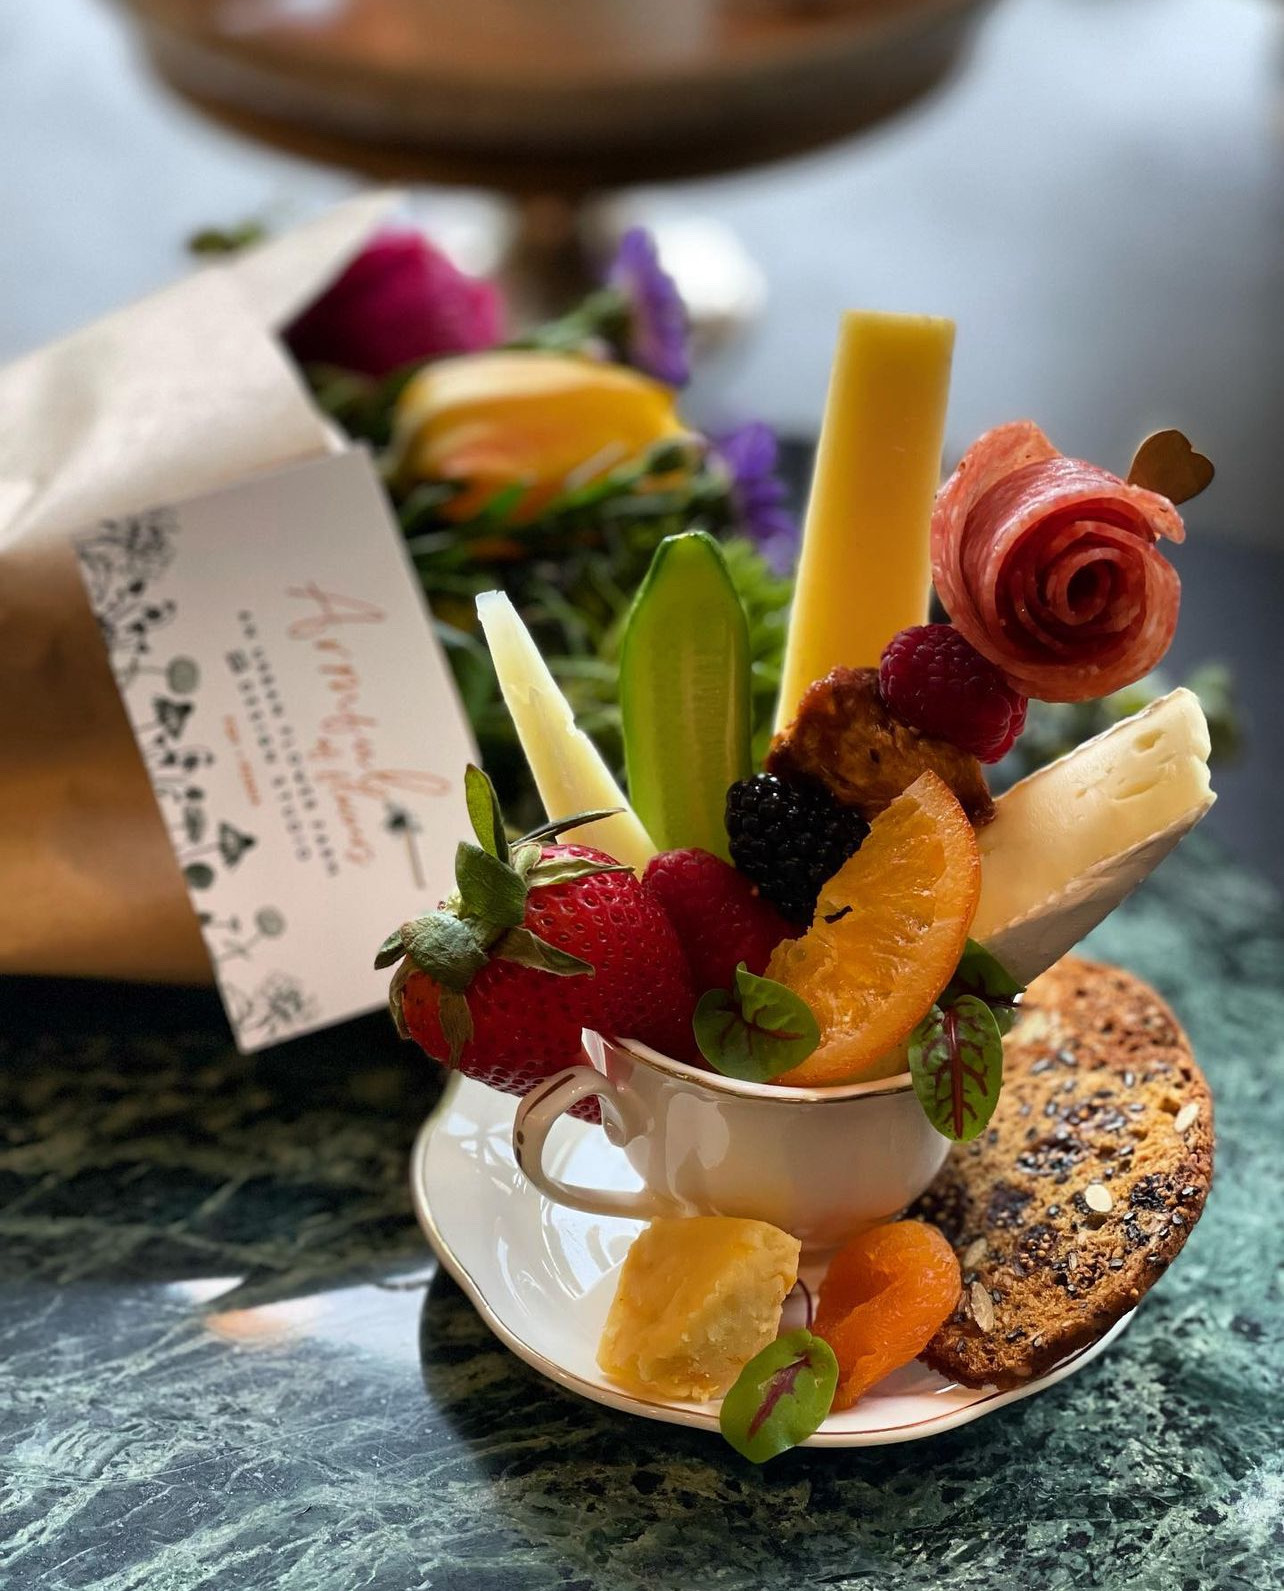 A photo of a food arrangement made by the Cheese Queen. A bouquet of fruits, cheeses, and meats sits in a teacup.